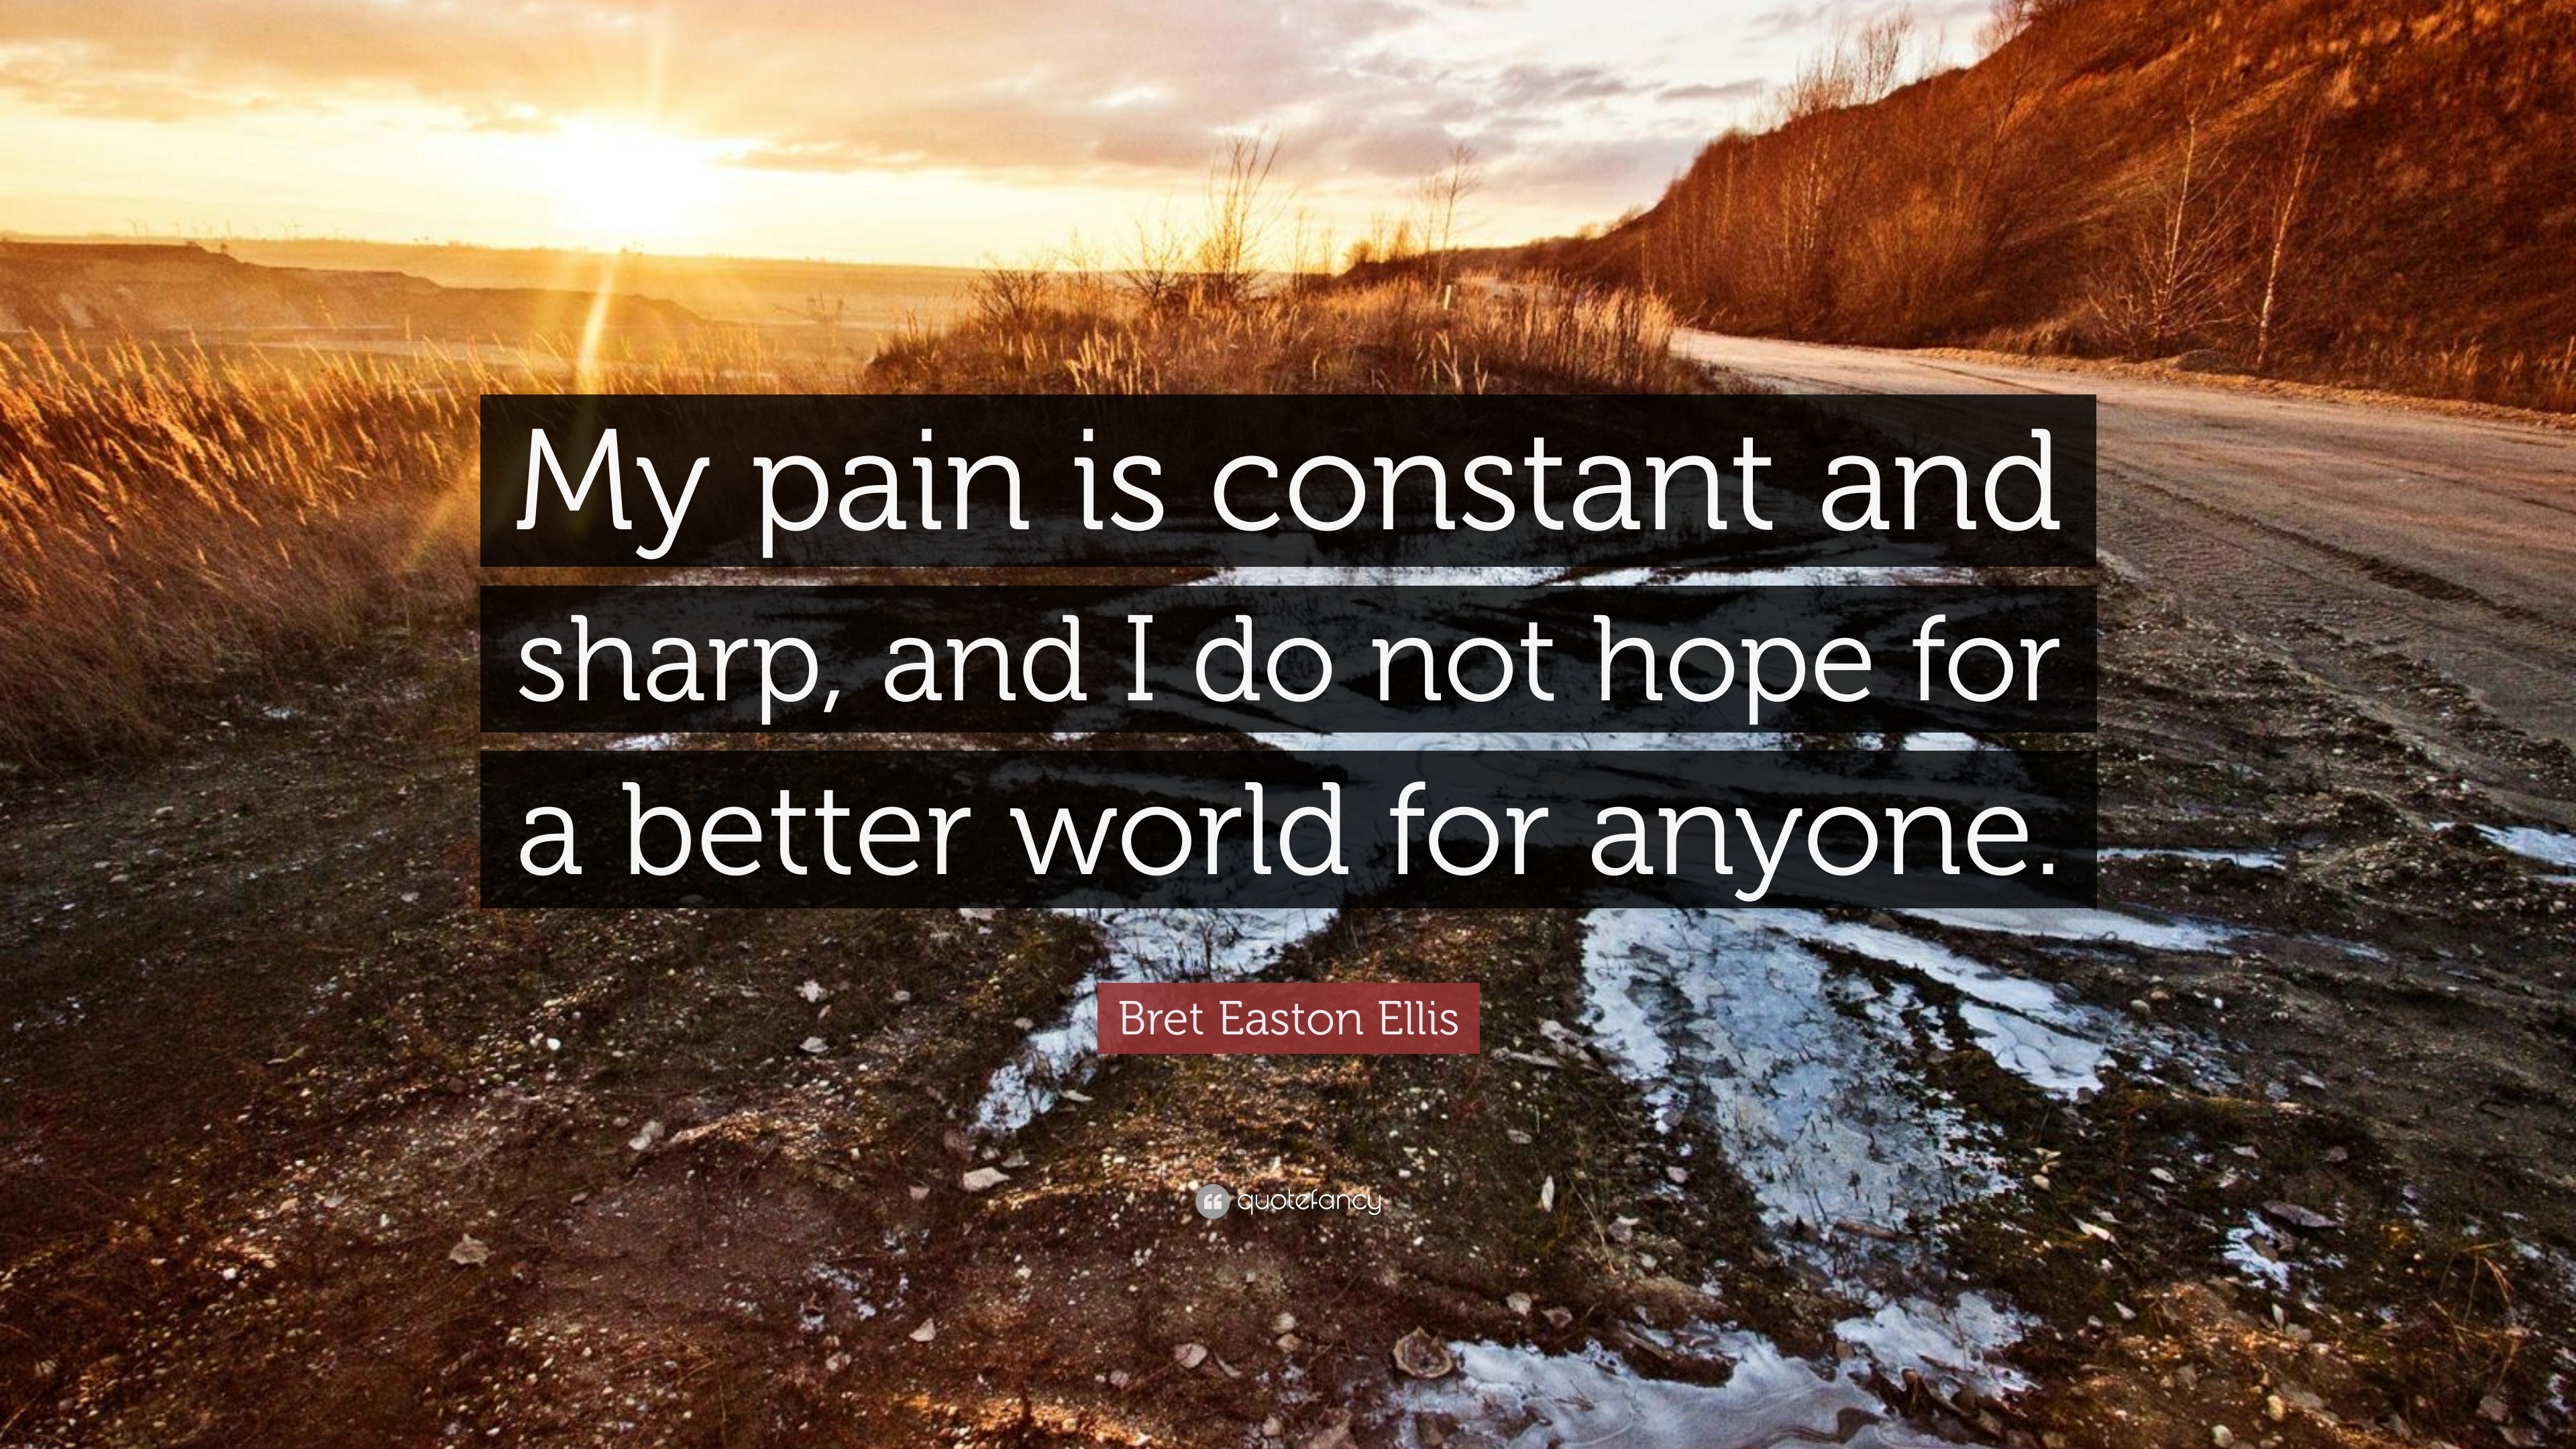 Bret Easton Ellis Quote: “My pain is constant and sharp, and I do not ...